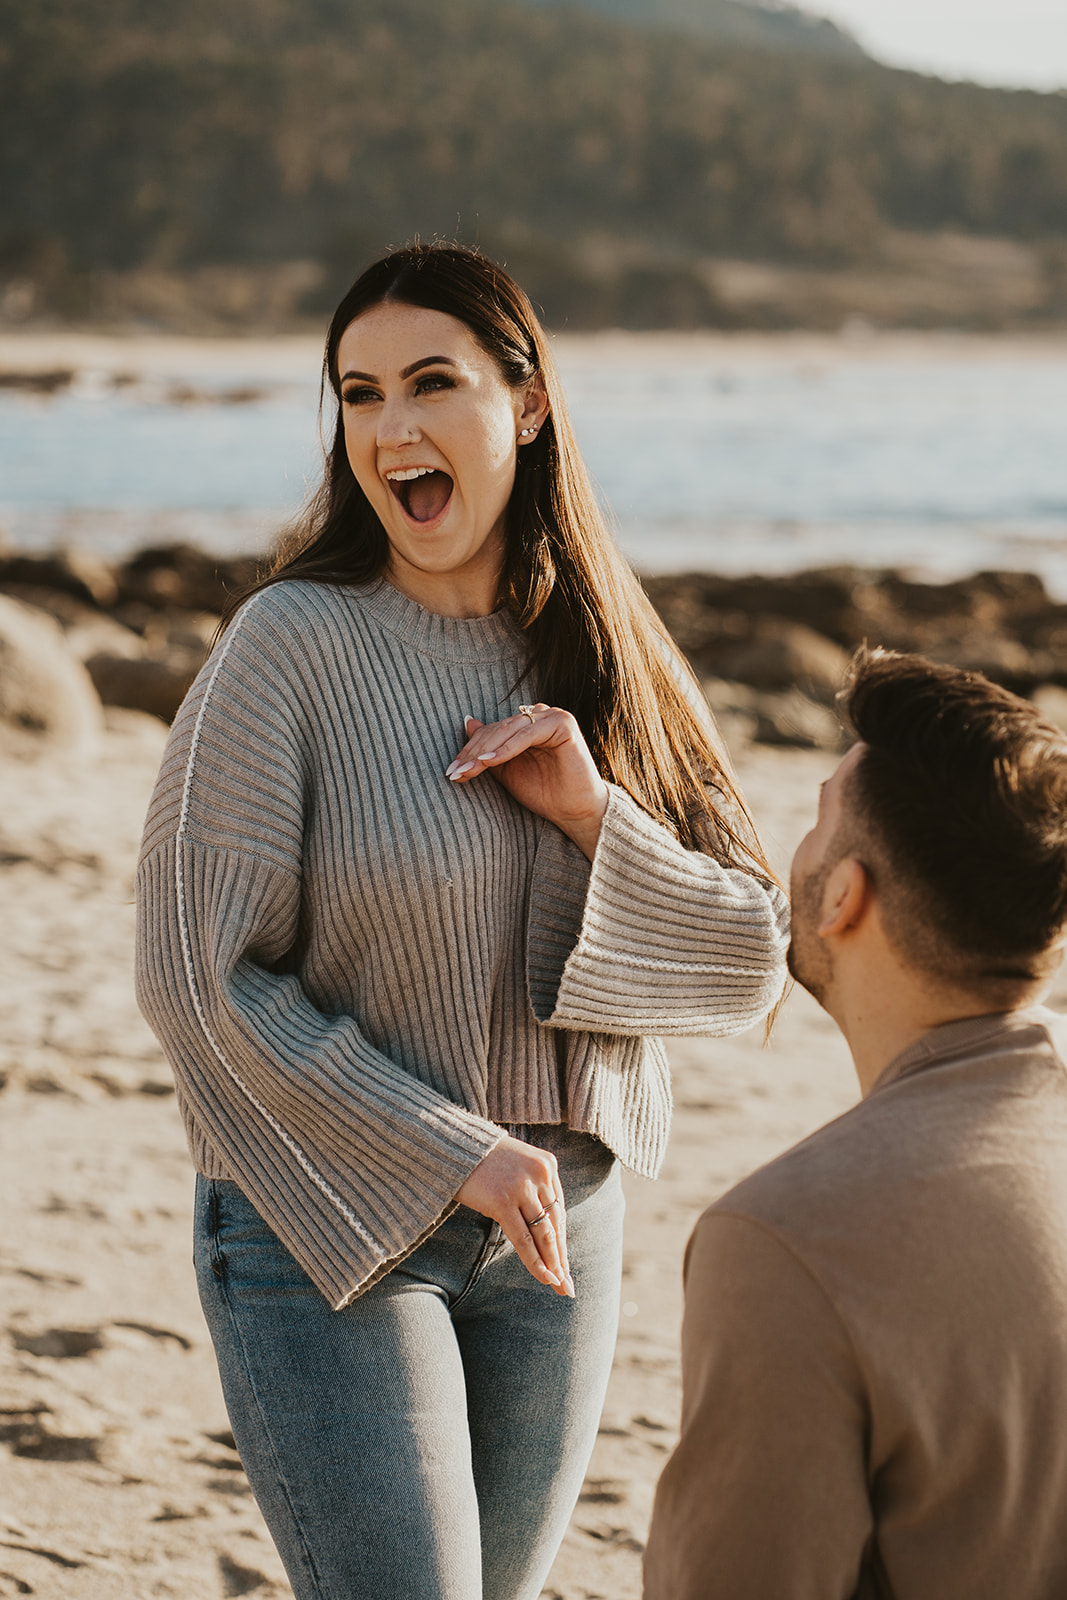 Overjoyed after being proposed to on the beach in Carmel-by-the-Sea